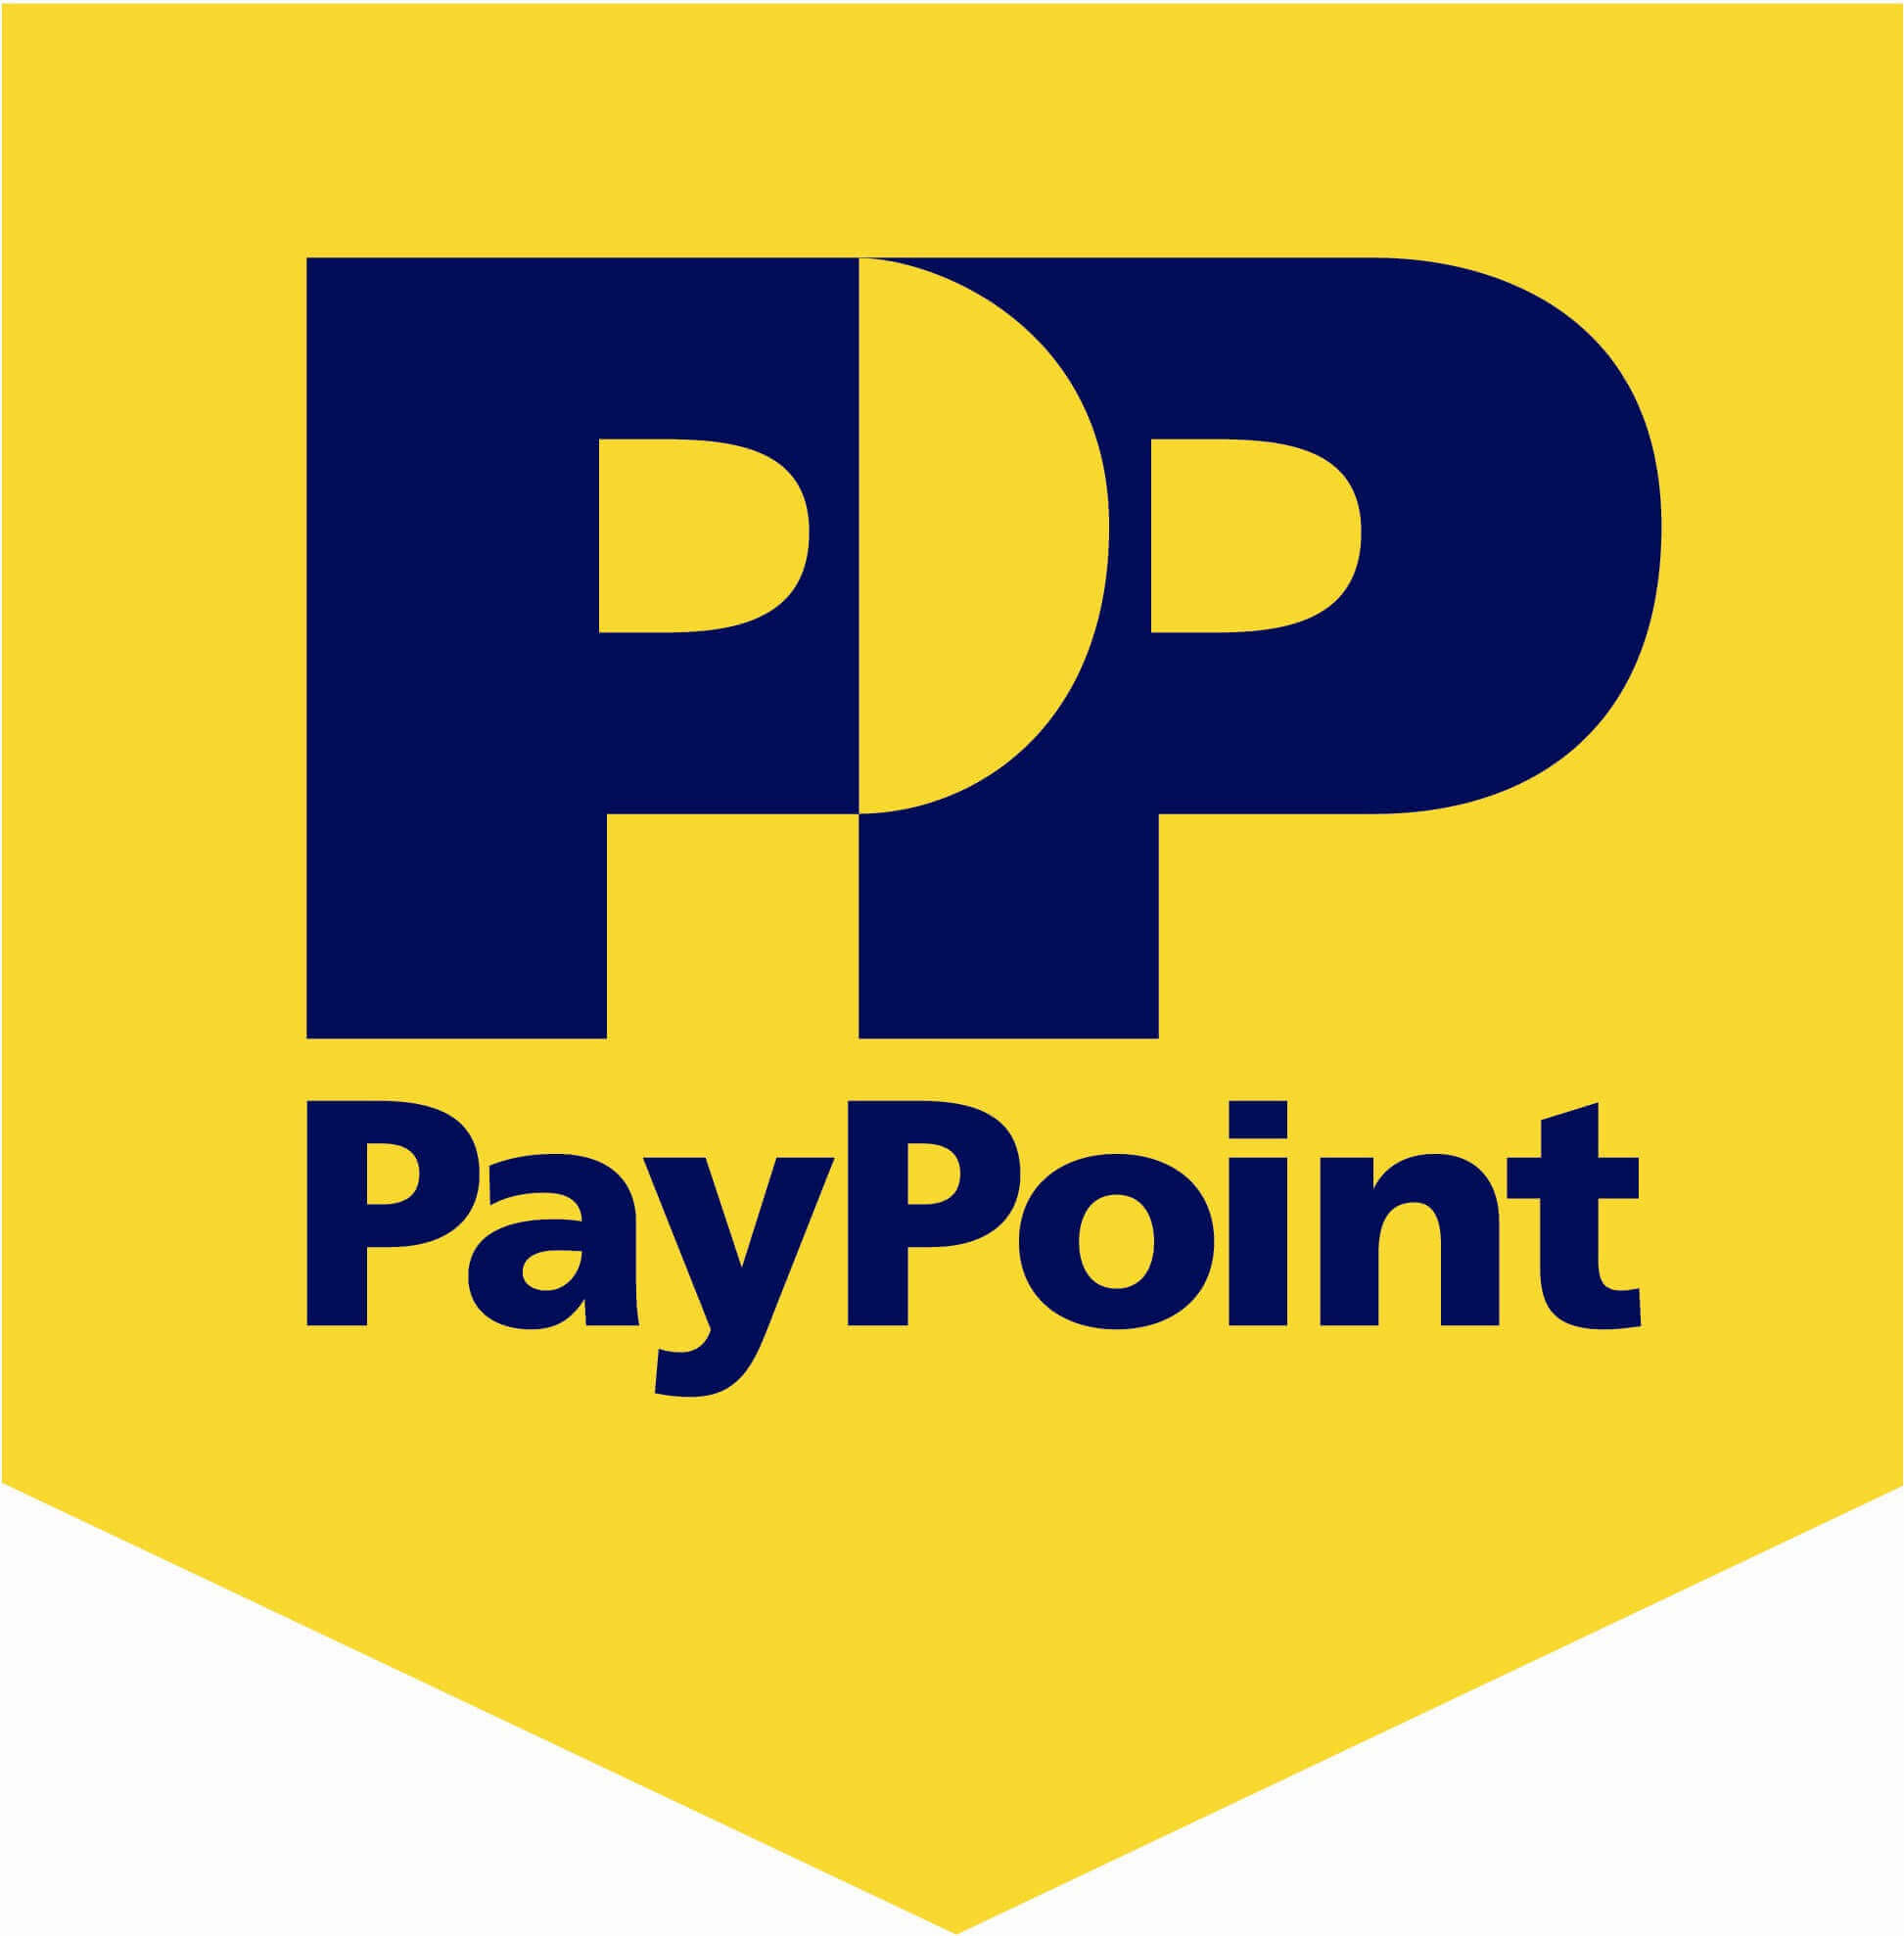 Pay Point logo